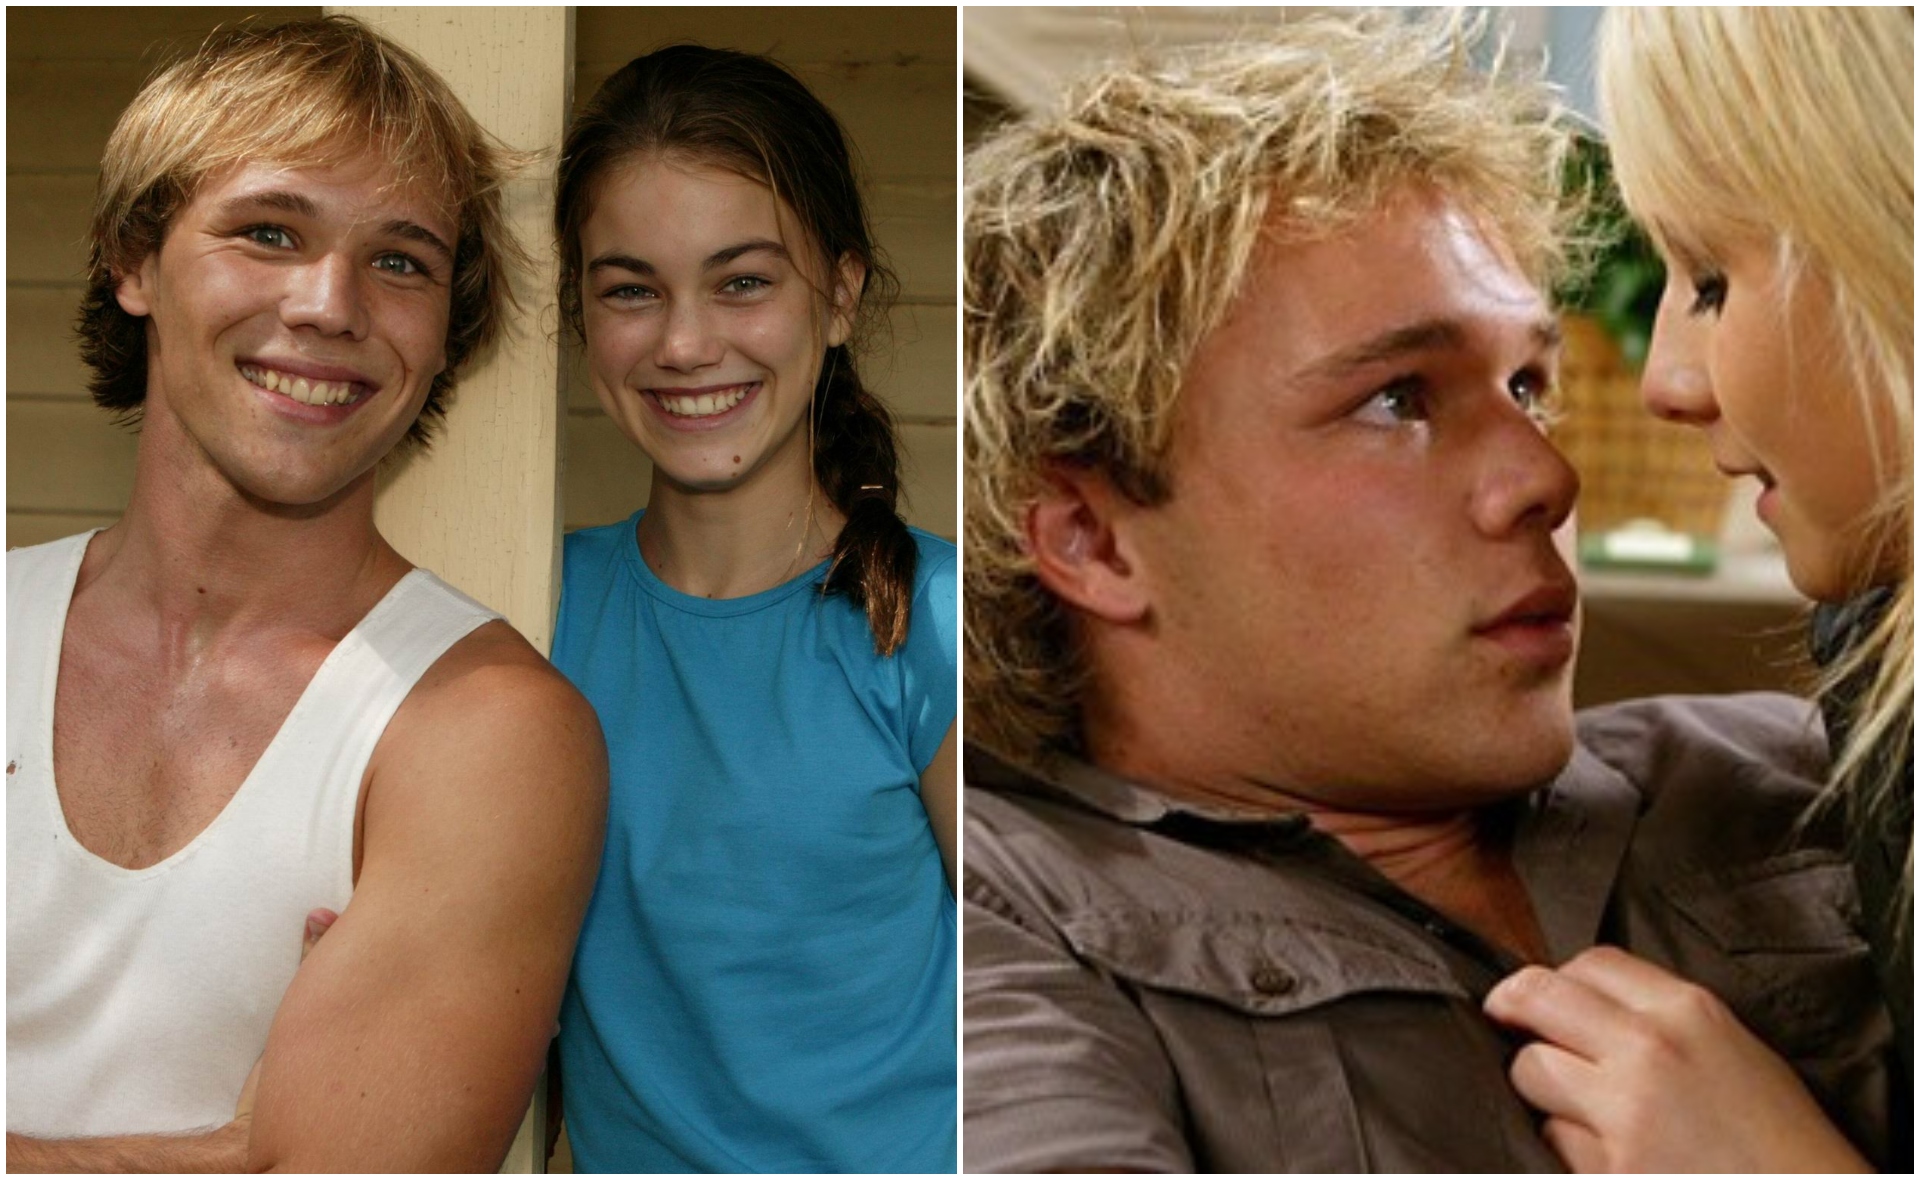 In 2007, Lincoln Lewis entered our lives on Home and Away – we haven’t stopped thinking about it since